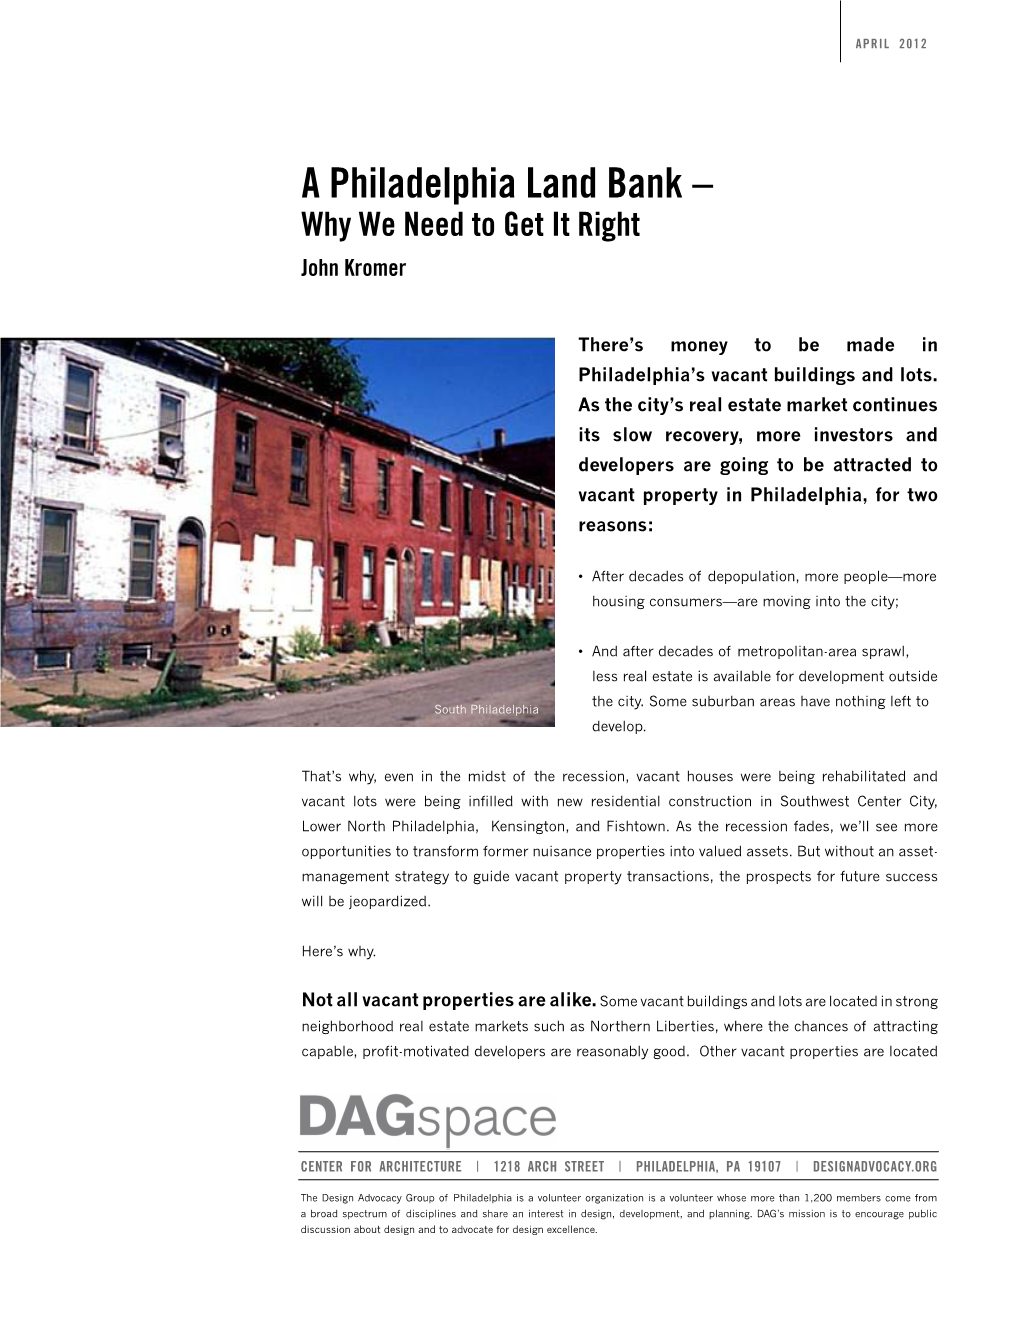 A Philadelphia Land Bank Why We Need to Get It Right